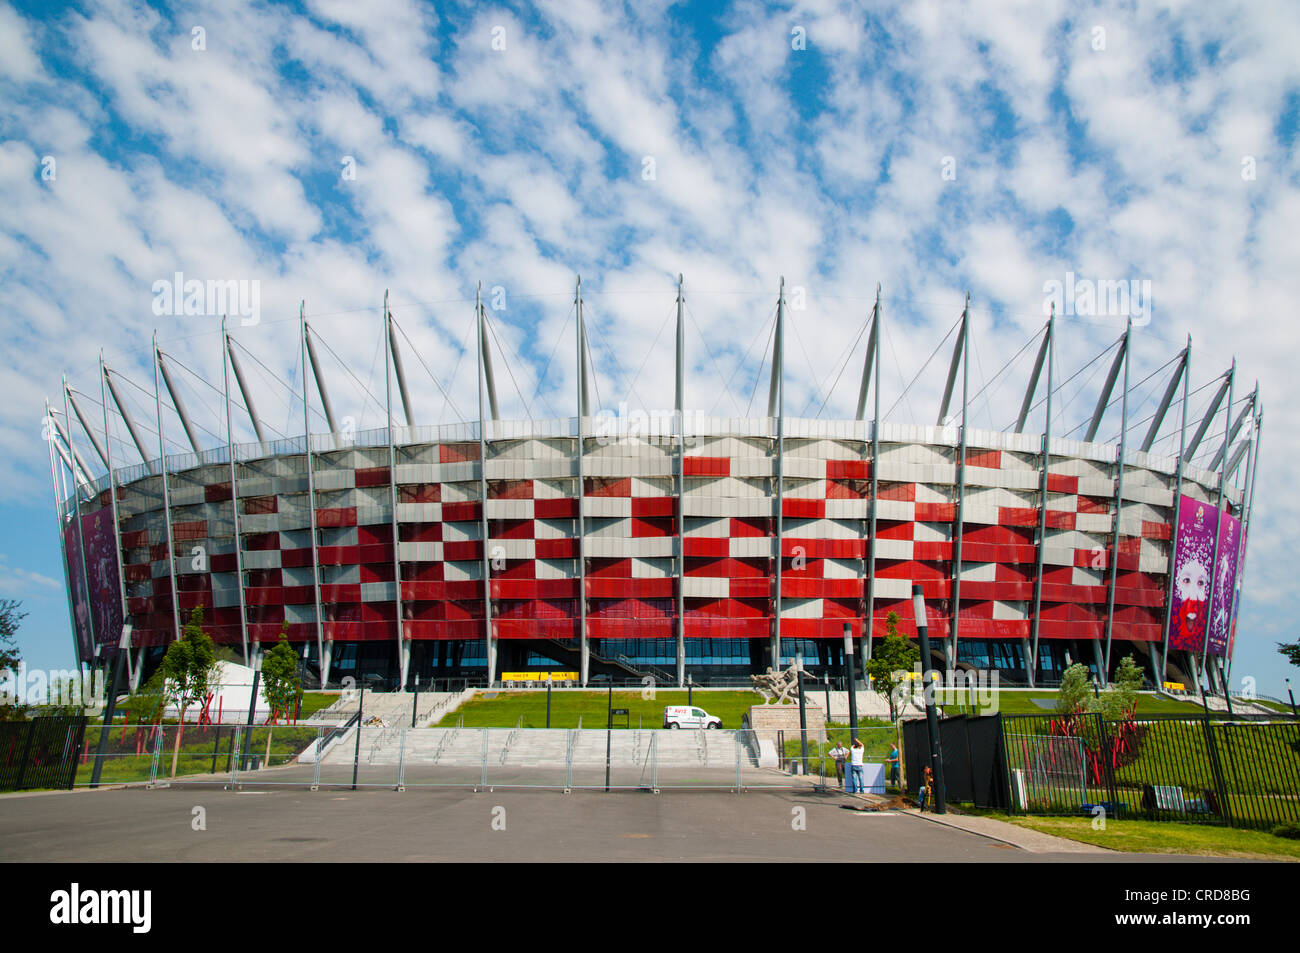 Stadion Narodowy le Stade national (2012) construit pour l'Euro de football district Europe Pologne Varsovie Praga Banque D'Images